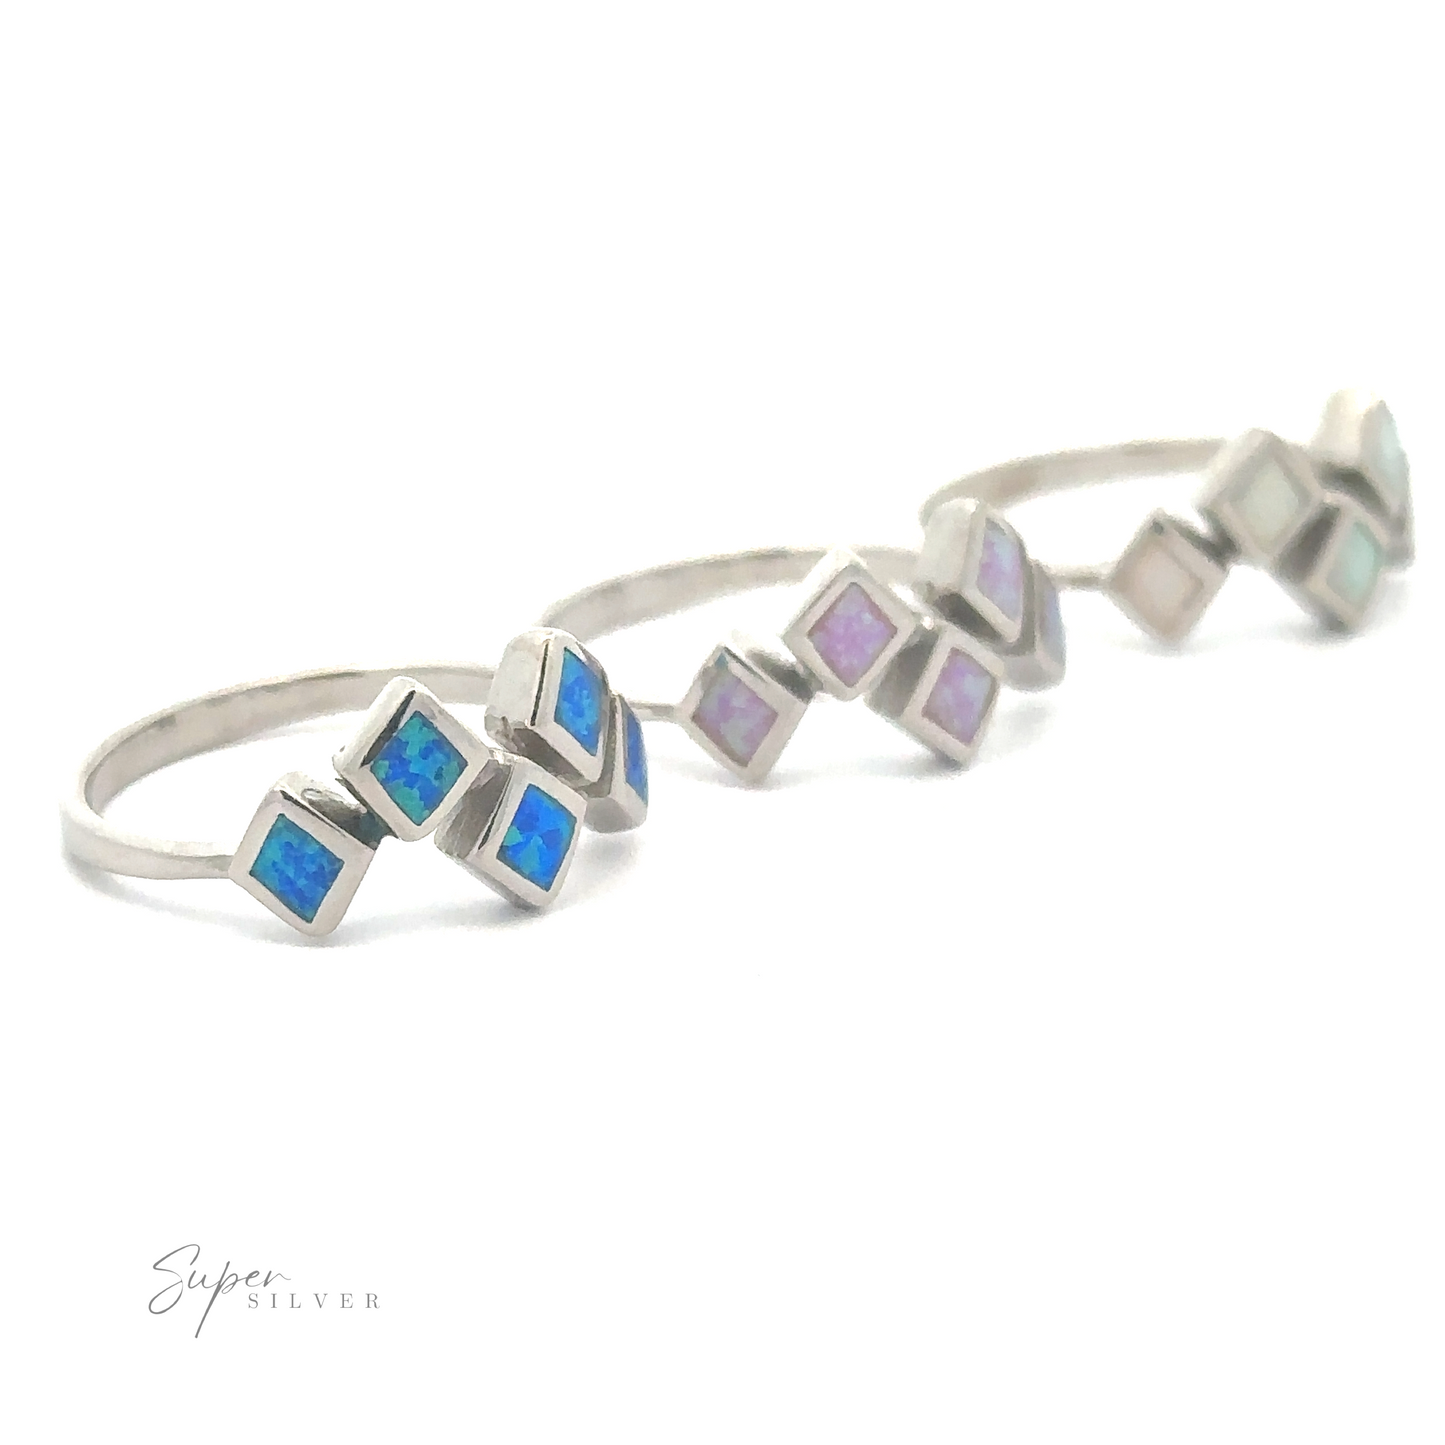 Two Diamond Pattern Lab-Created Opal Rings showcased on a light background.